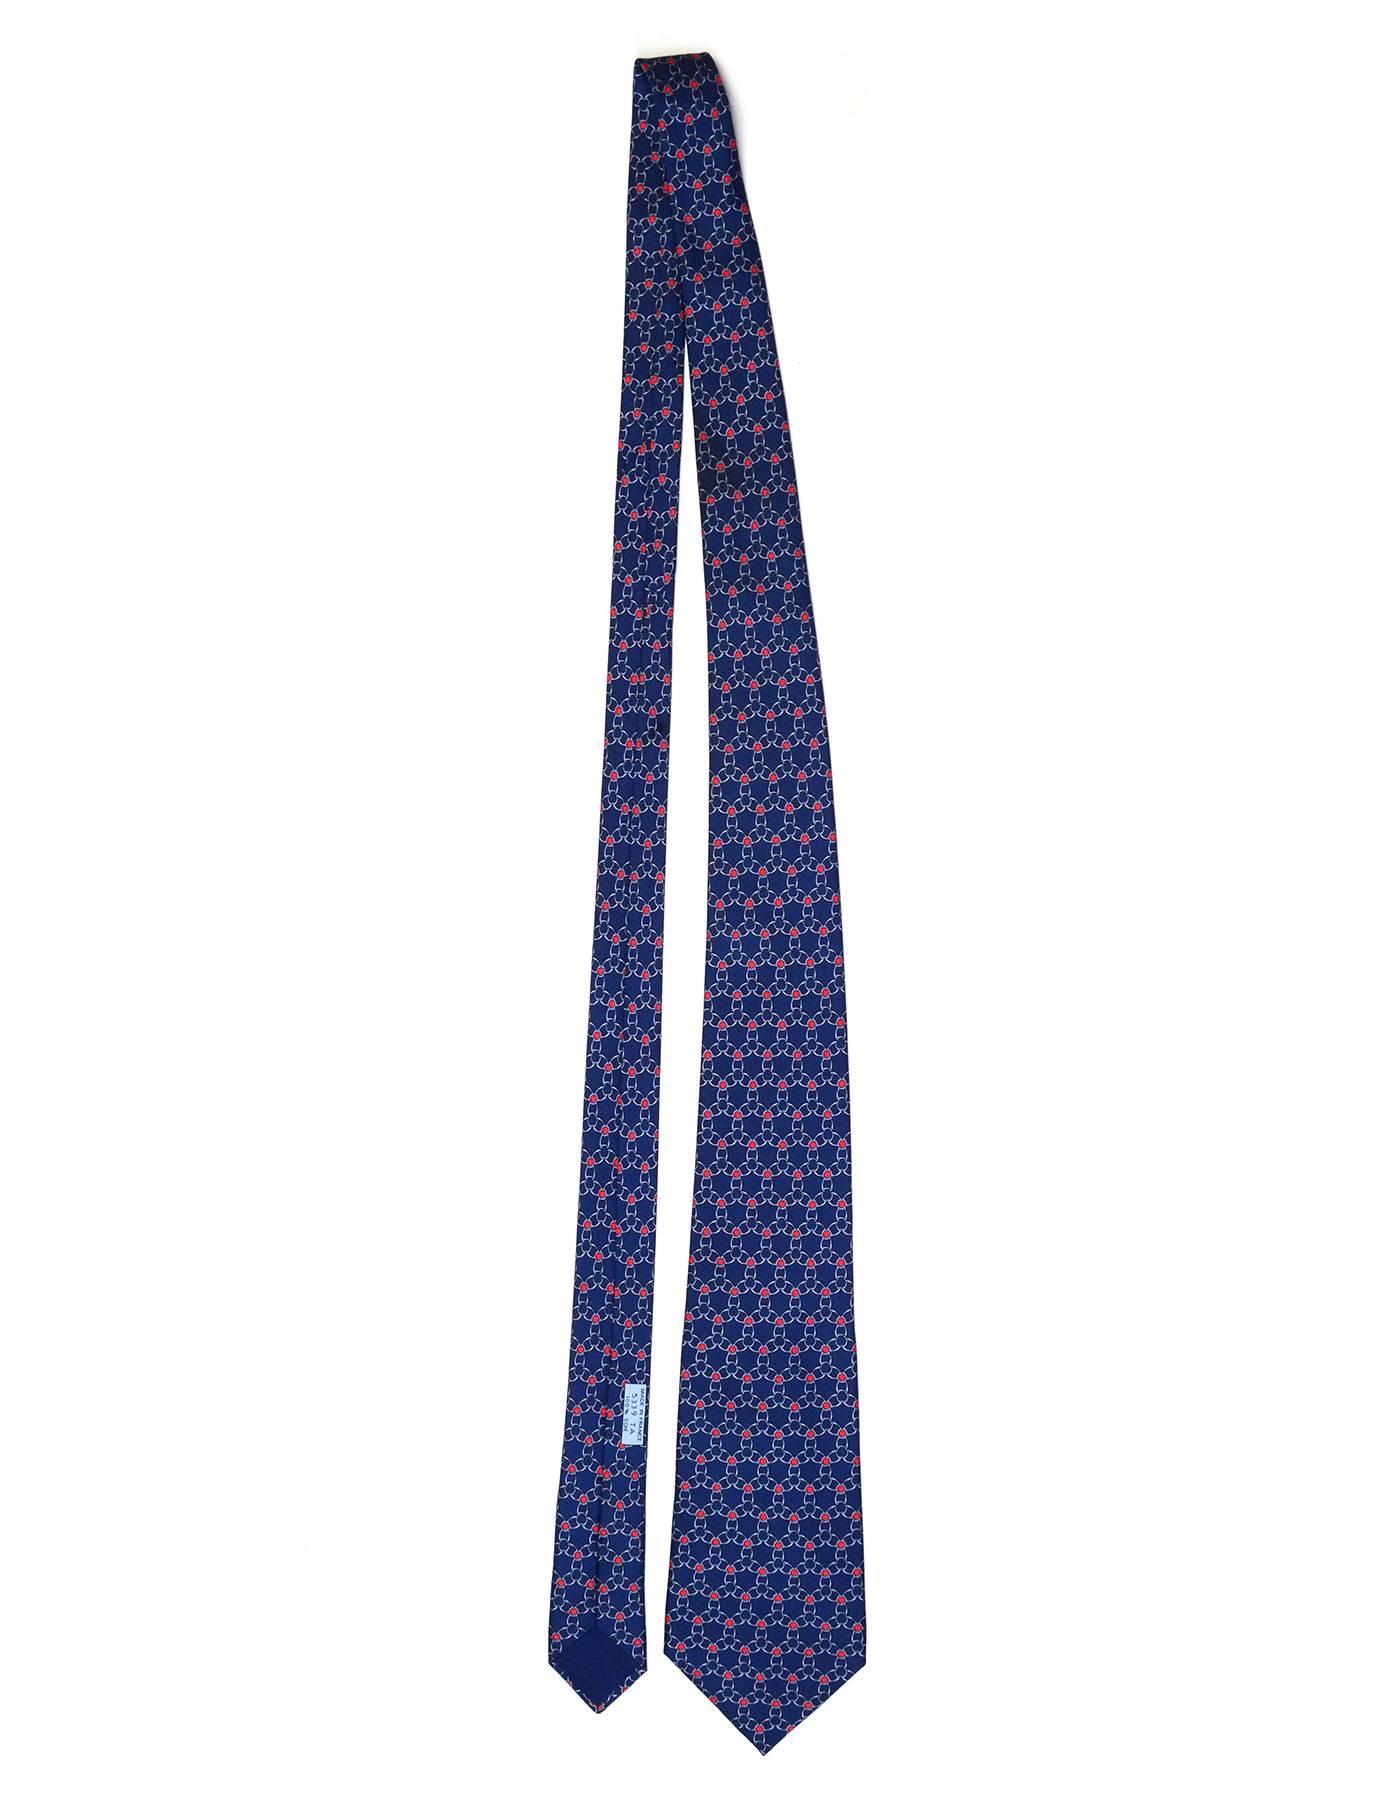 Hermes Red & Navy Woven Chain Print Silk Tie

Made In: France
Color: Red and navy
Composition: 100% silk
Retail Price: $180 + tax
Overall Condition: Excellent pre-owned condition
Measurements: 
Length: 62"
Width: 2"-3.75"